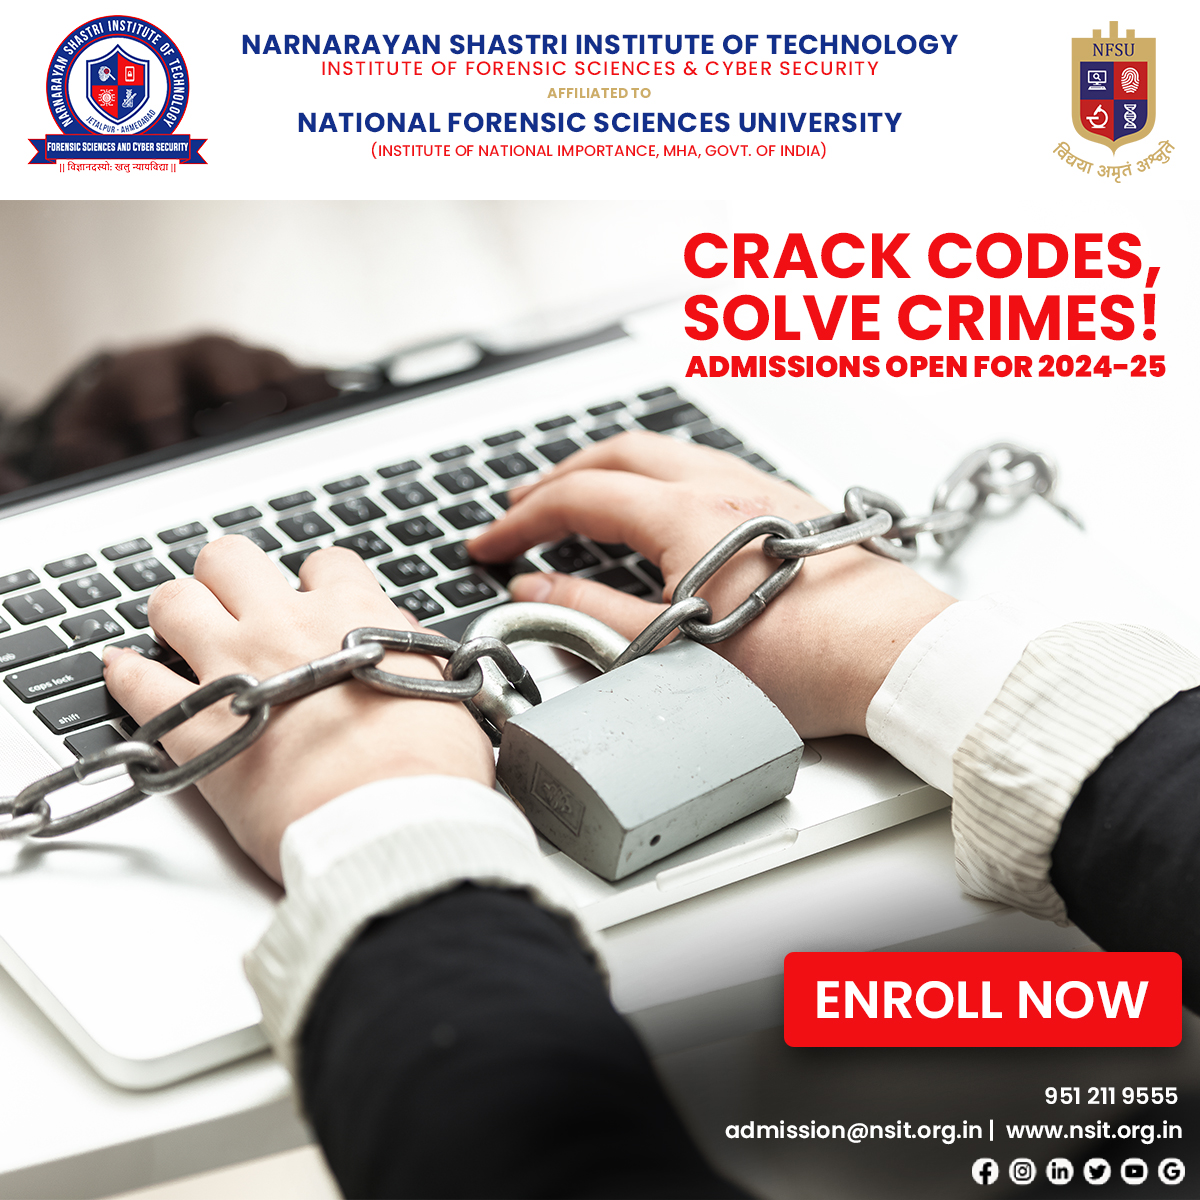 Enroll yourself in Forensic Science & #Cybersecurity to Crack Codes and Solve Crimes!

#nsit #nsitjetalpur #digitalforensics #ForensicScience #forensics #ahmedabad #AdmissionOpen #ifscs #security #technology #cybercrime #privacy #college #student #education #students